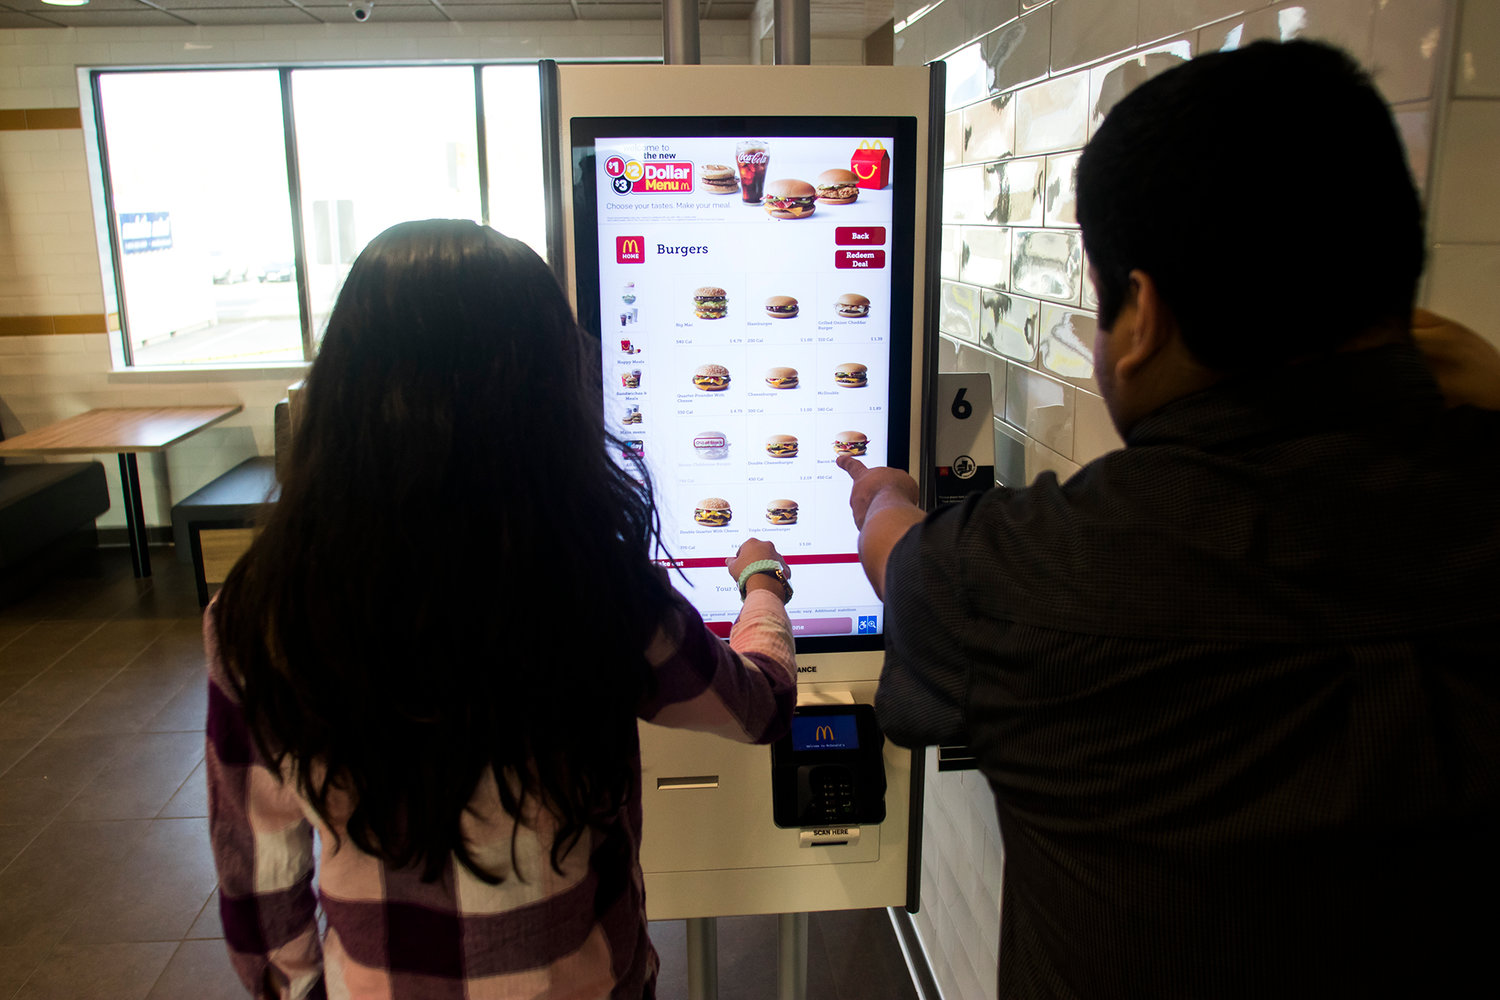 Rene Valdez, right, assistant manager at McDonald's, helps Cece Velazquez, left, order on the new touch-screen kiosk in the newly remodeled McDonald's Monday afternoon in Chehalis.